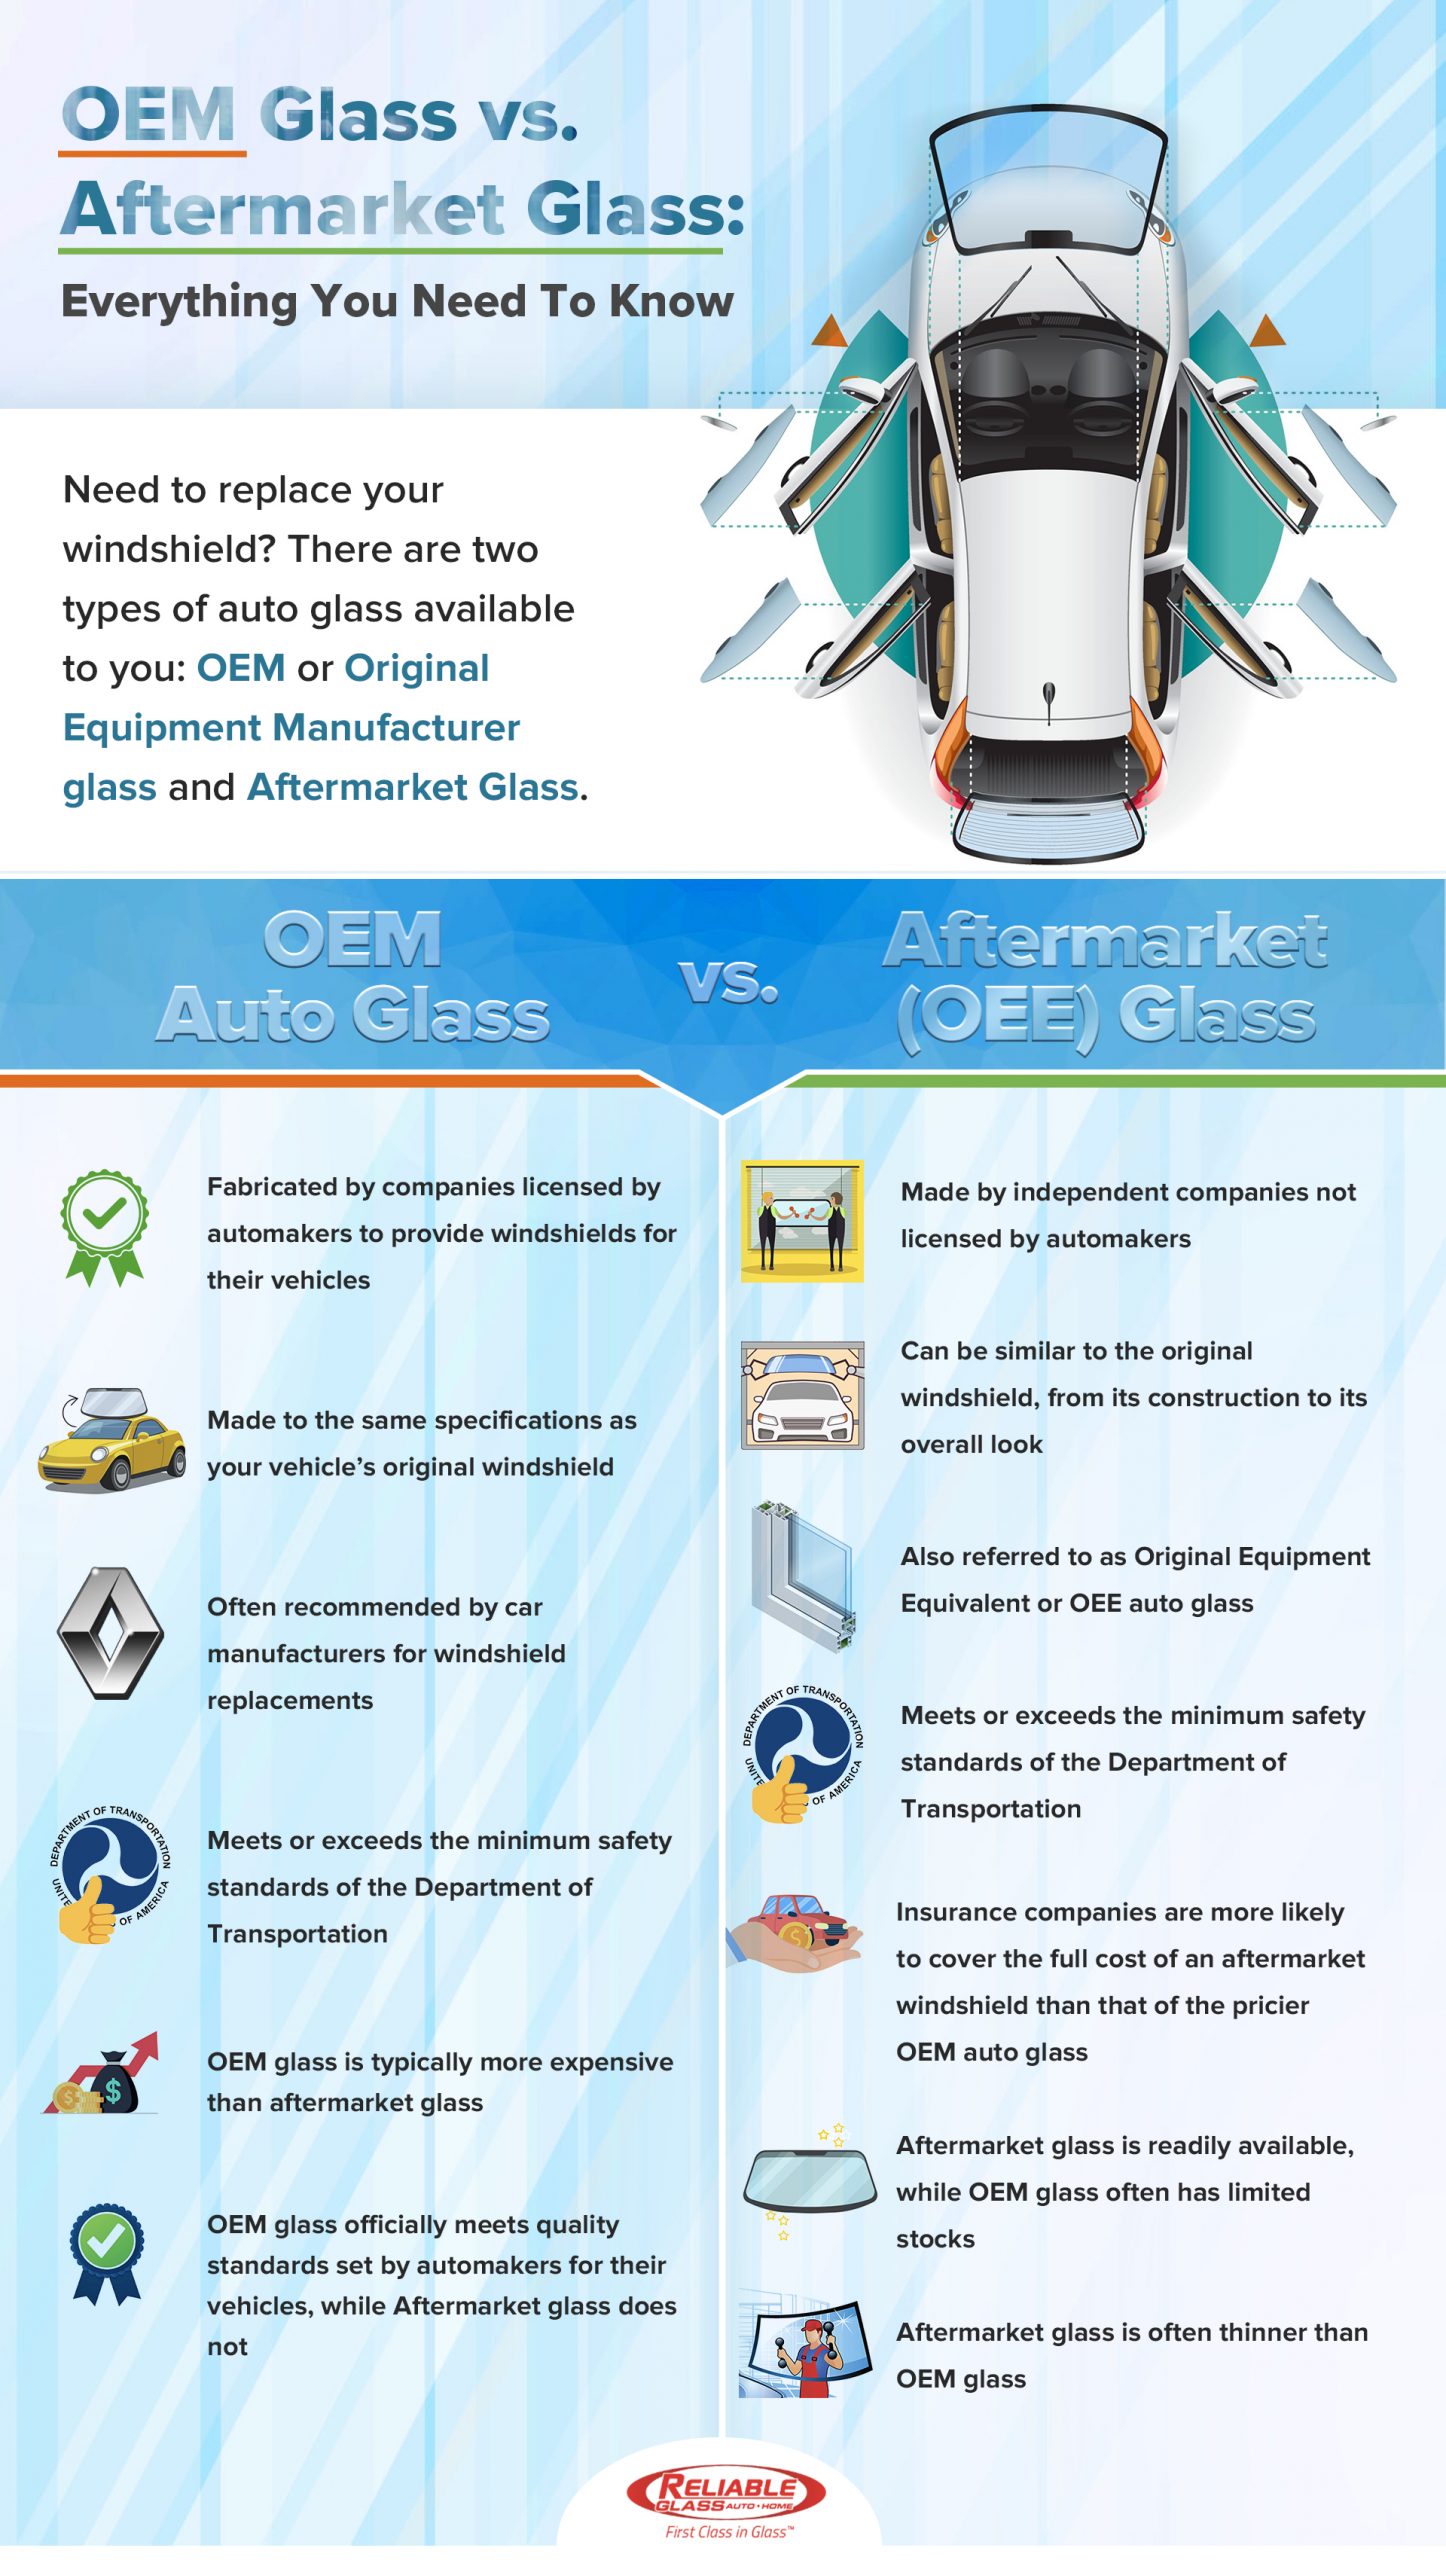 Your Choice? OEM Auto Glass or Aftermarket (OEE) Glass?